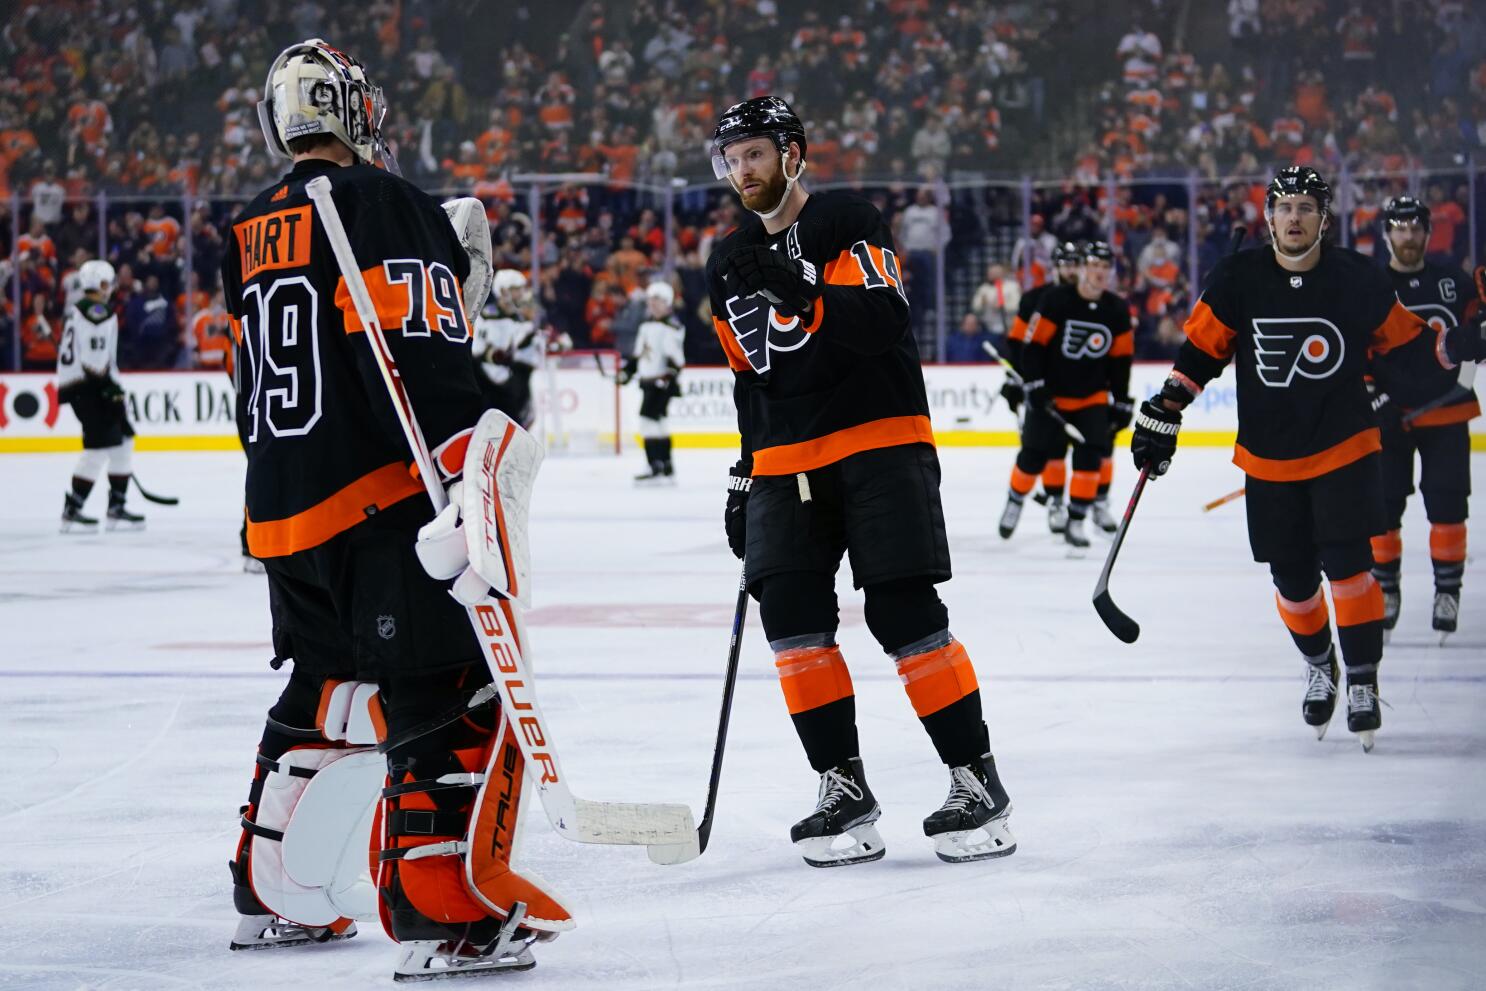 Philadelphia Flyers beat a shorthanded Detroit Red Wings club